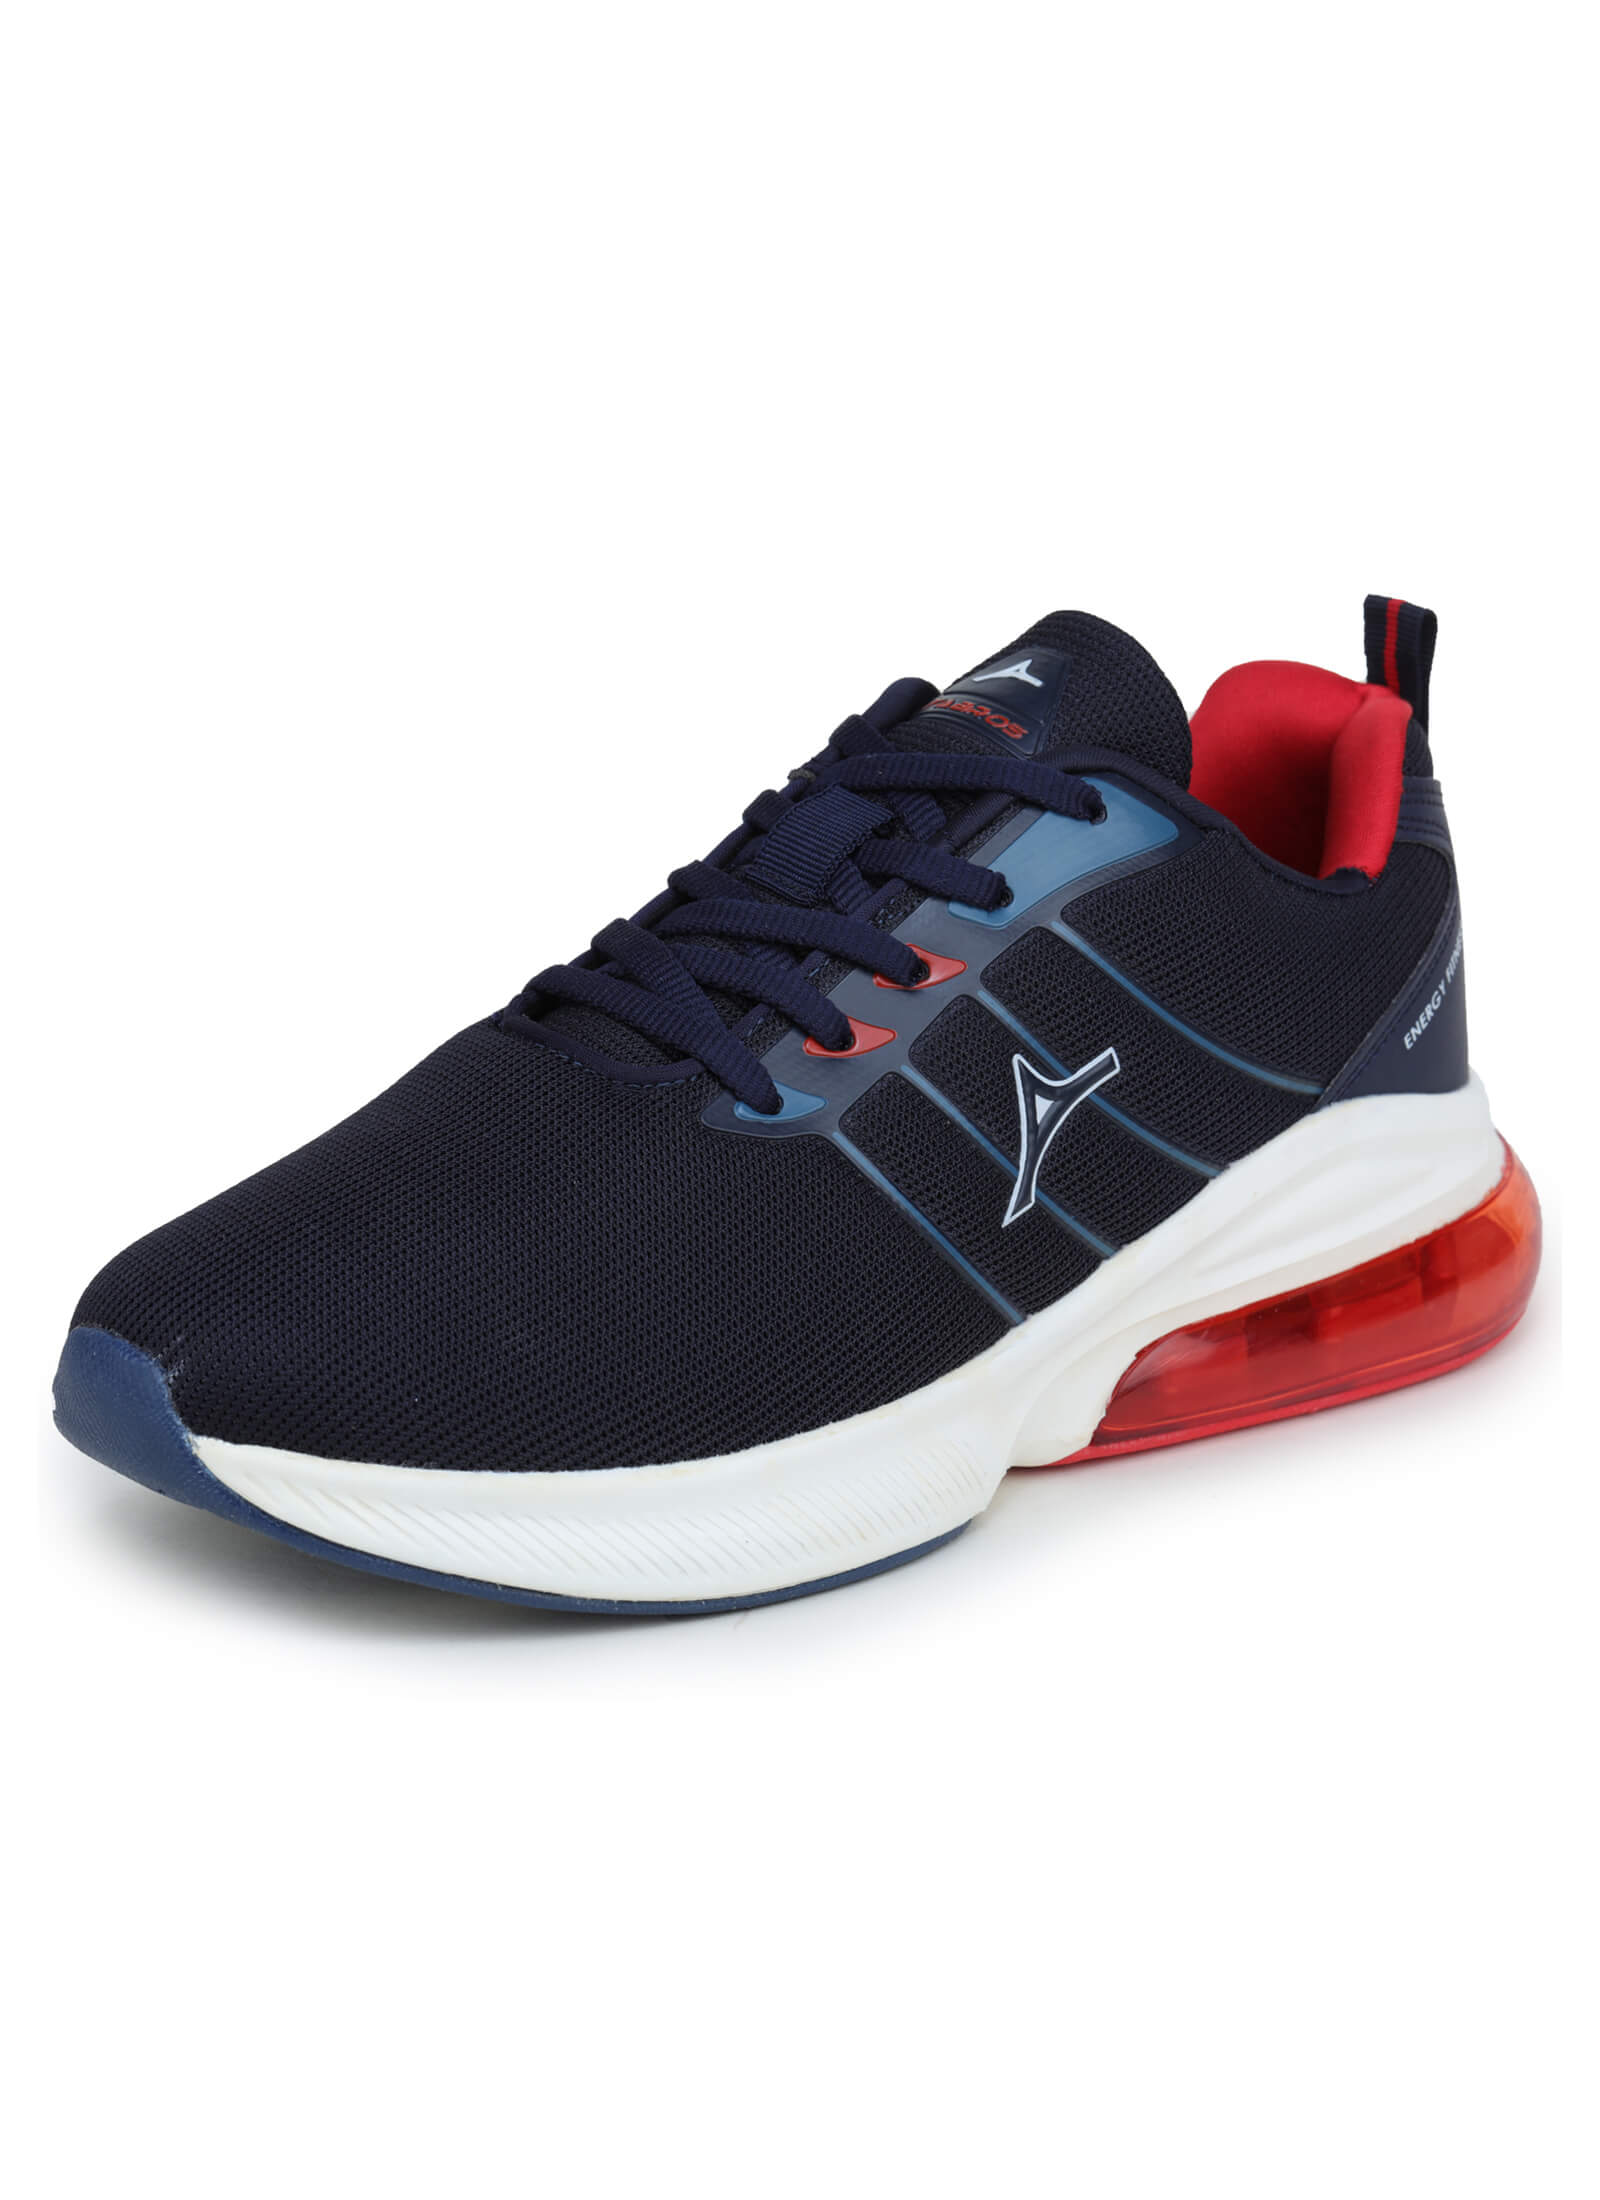 Bairstow-11 Anti-Skid Sports Shoes For Men